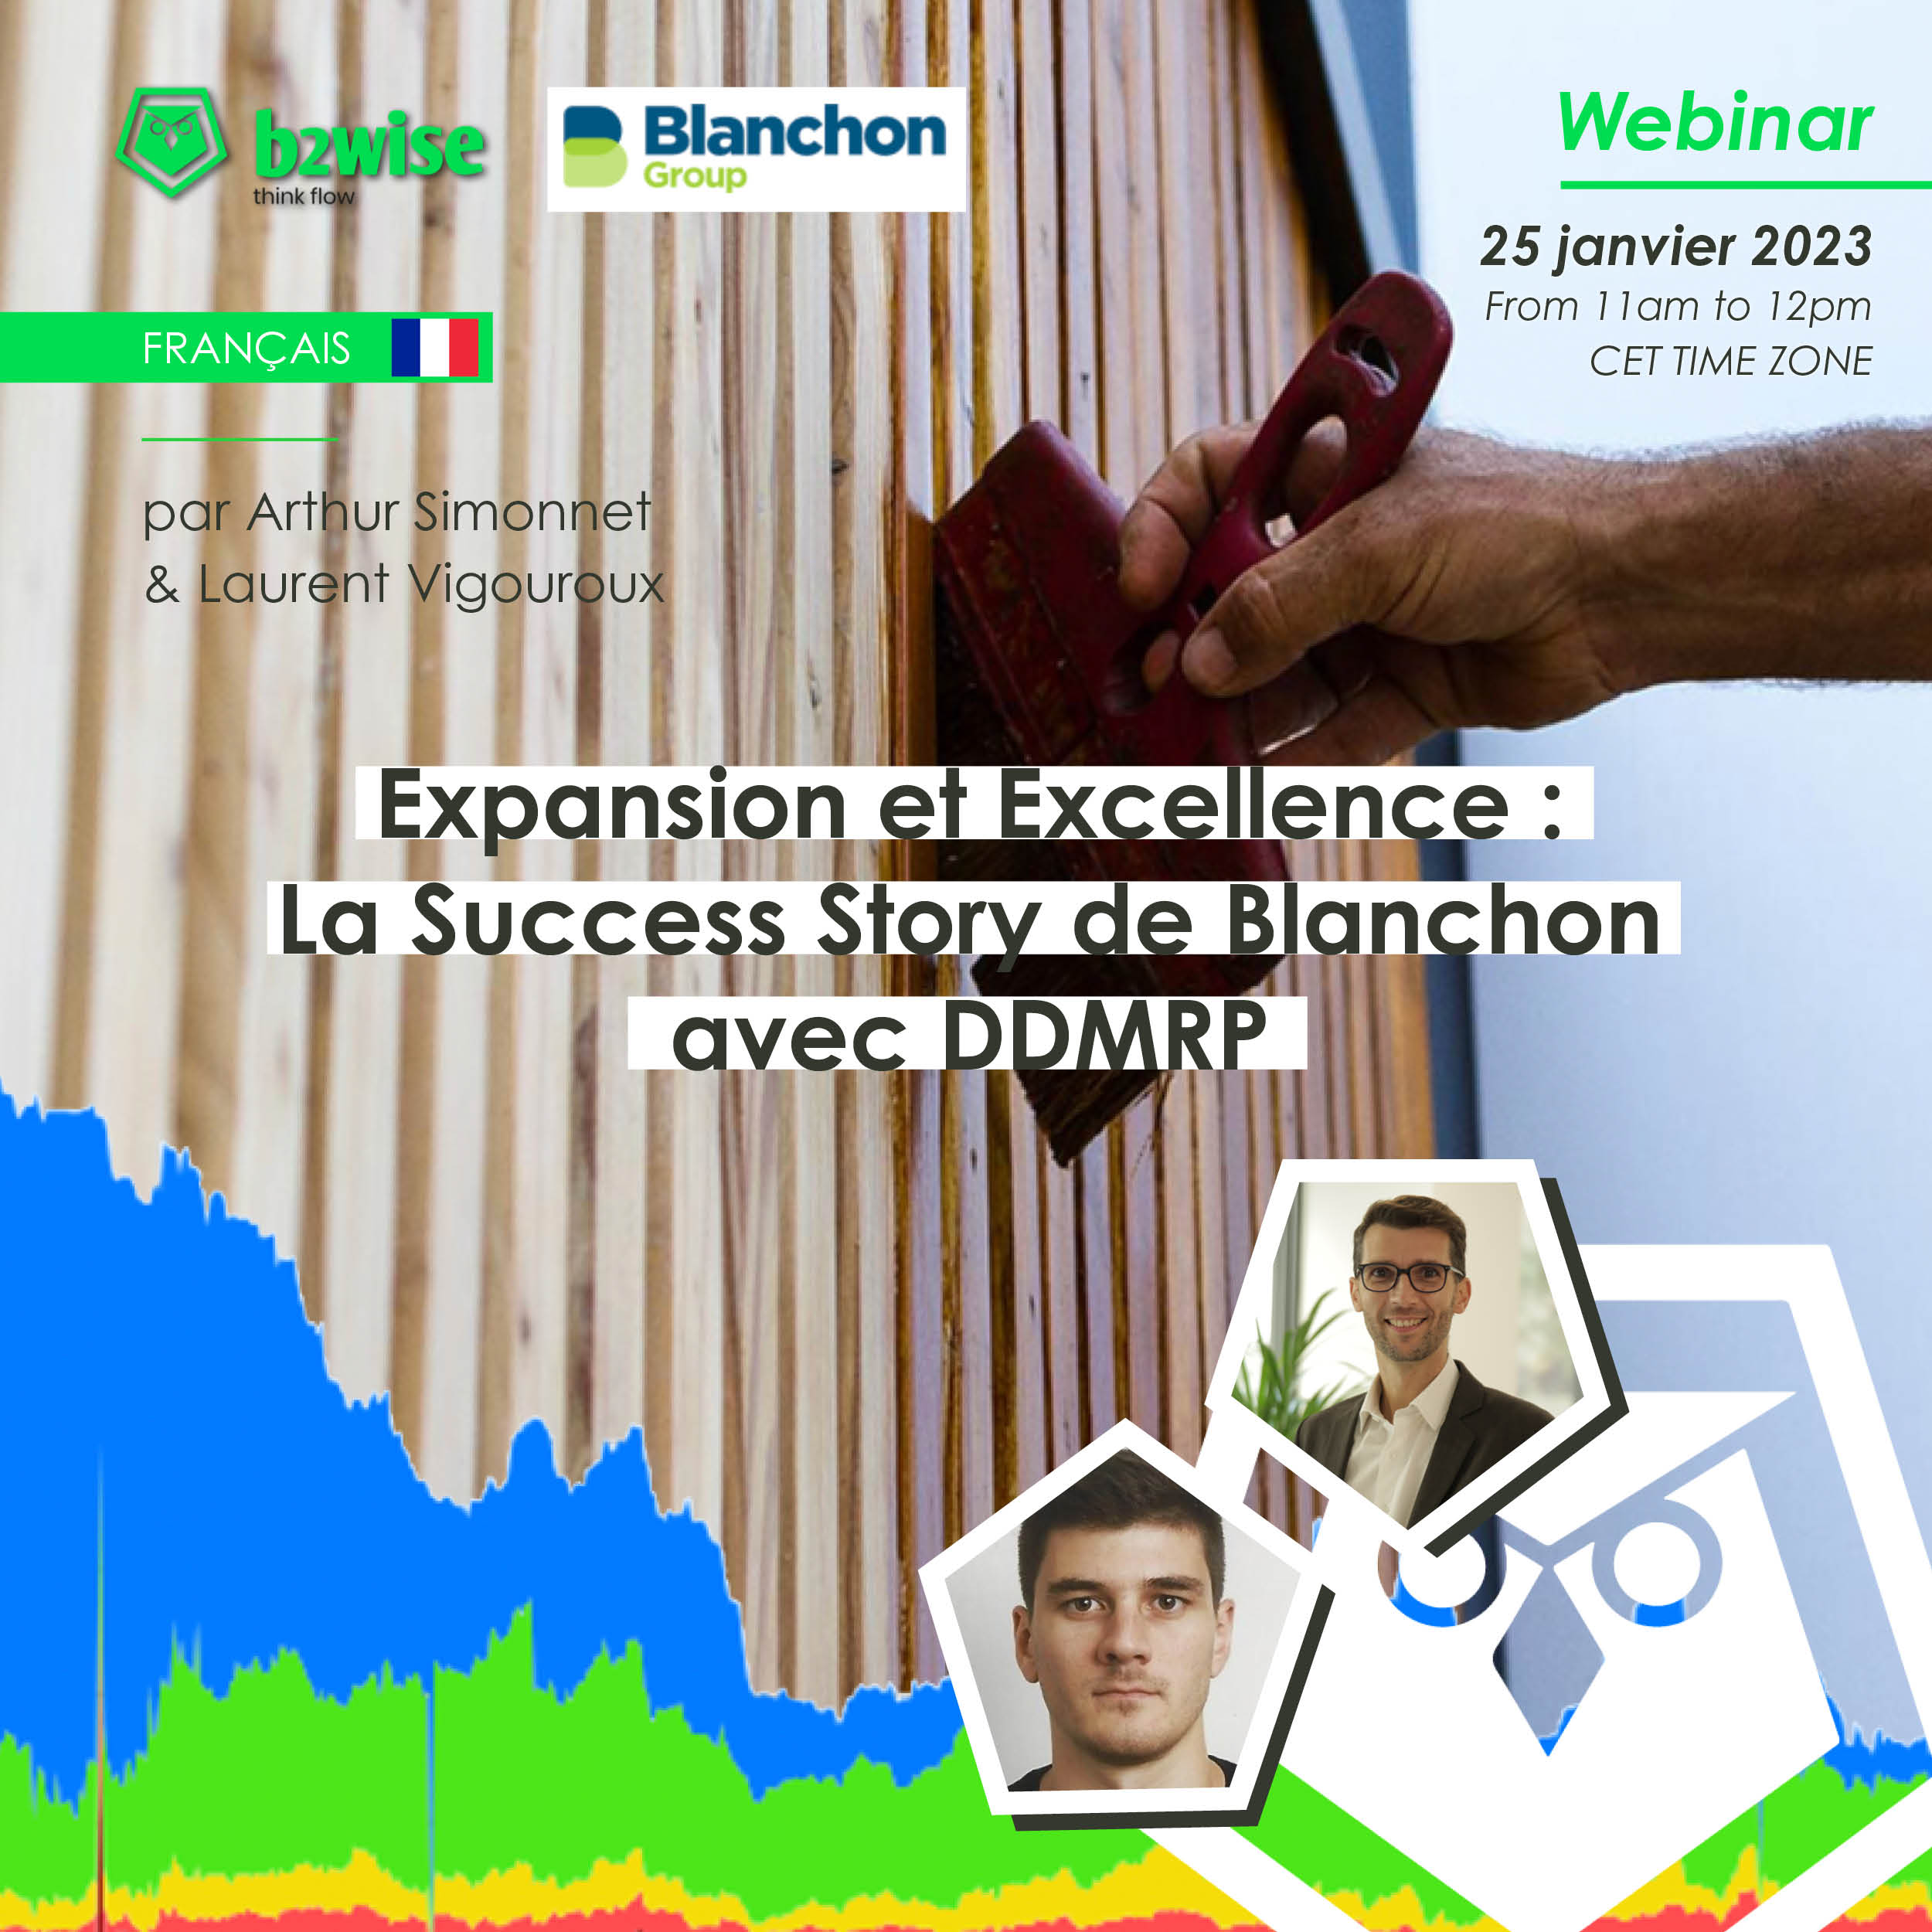 Webinar replay promotion for Blanchon's DDMRP implementation, featuring key insights from Arthur Simonnet, Head of Planning at Blanchon. Highlights the benefits of DDMRP in improving supply chain efficiency. Includes a registration link for access.